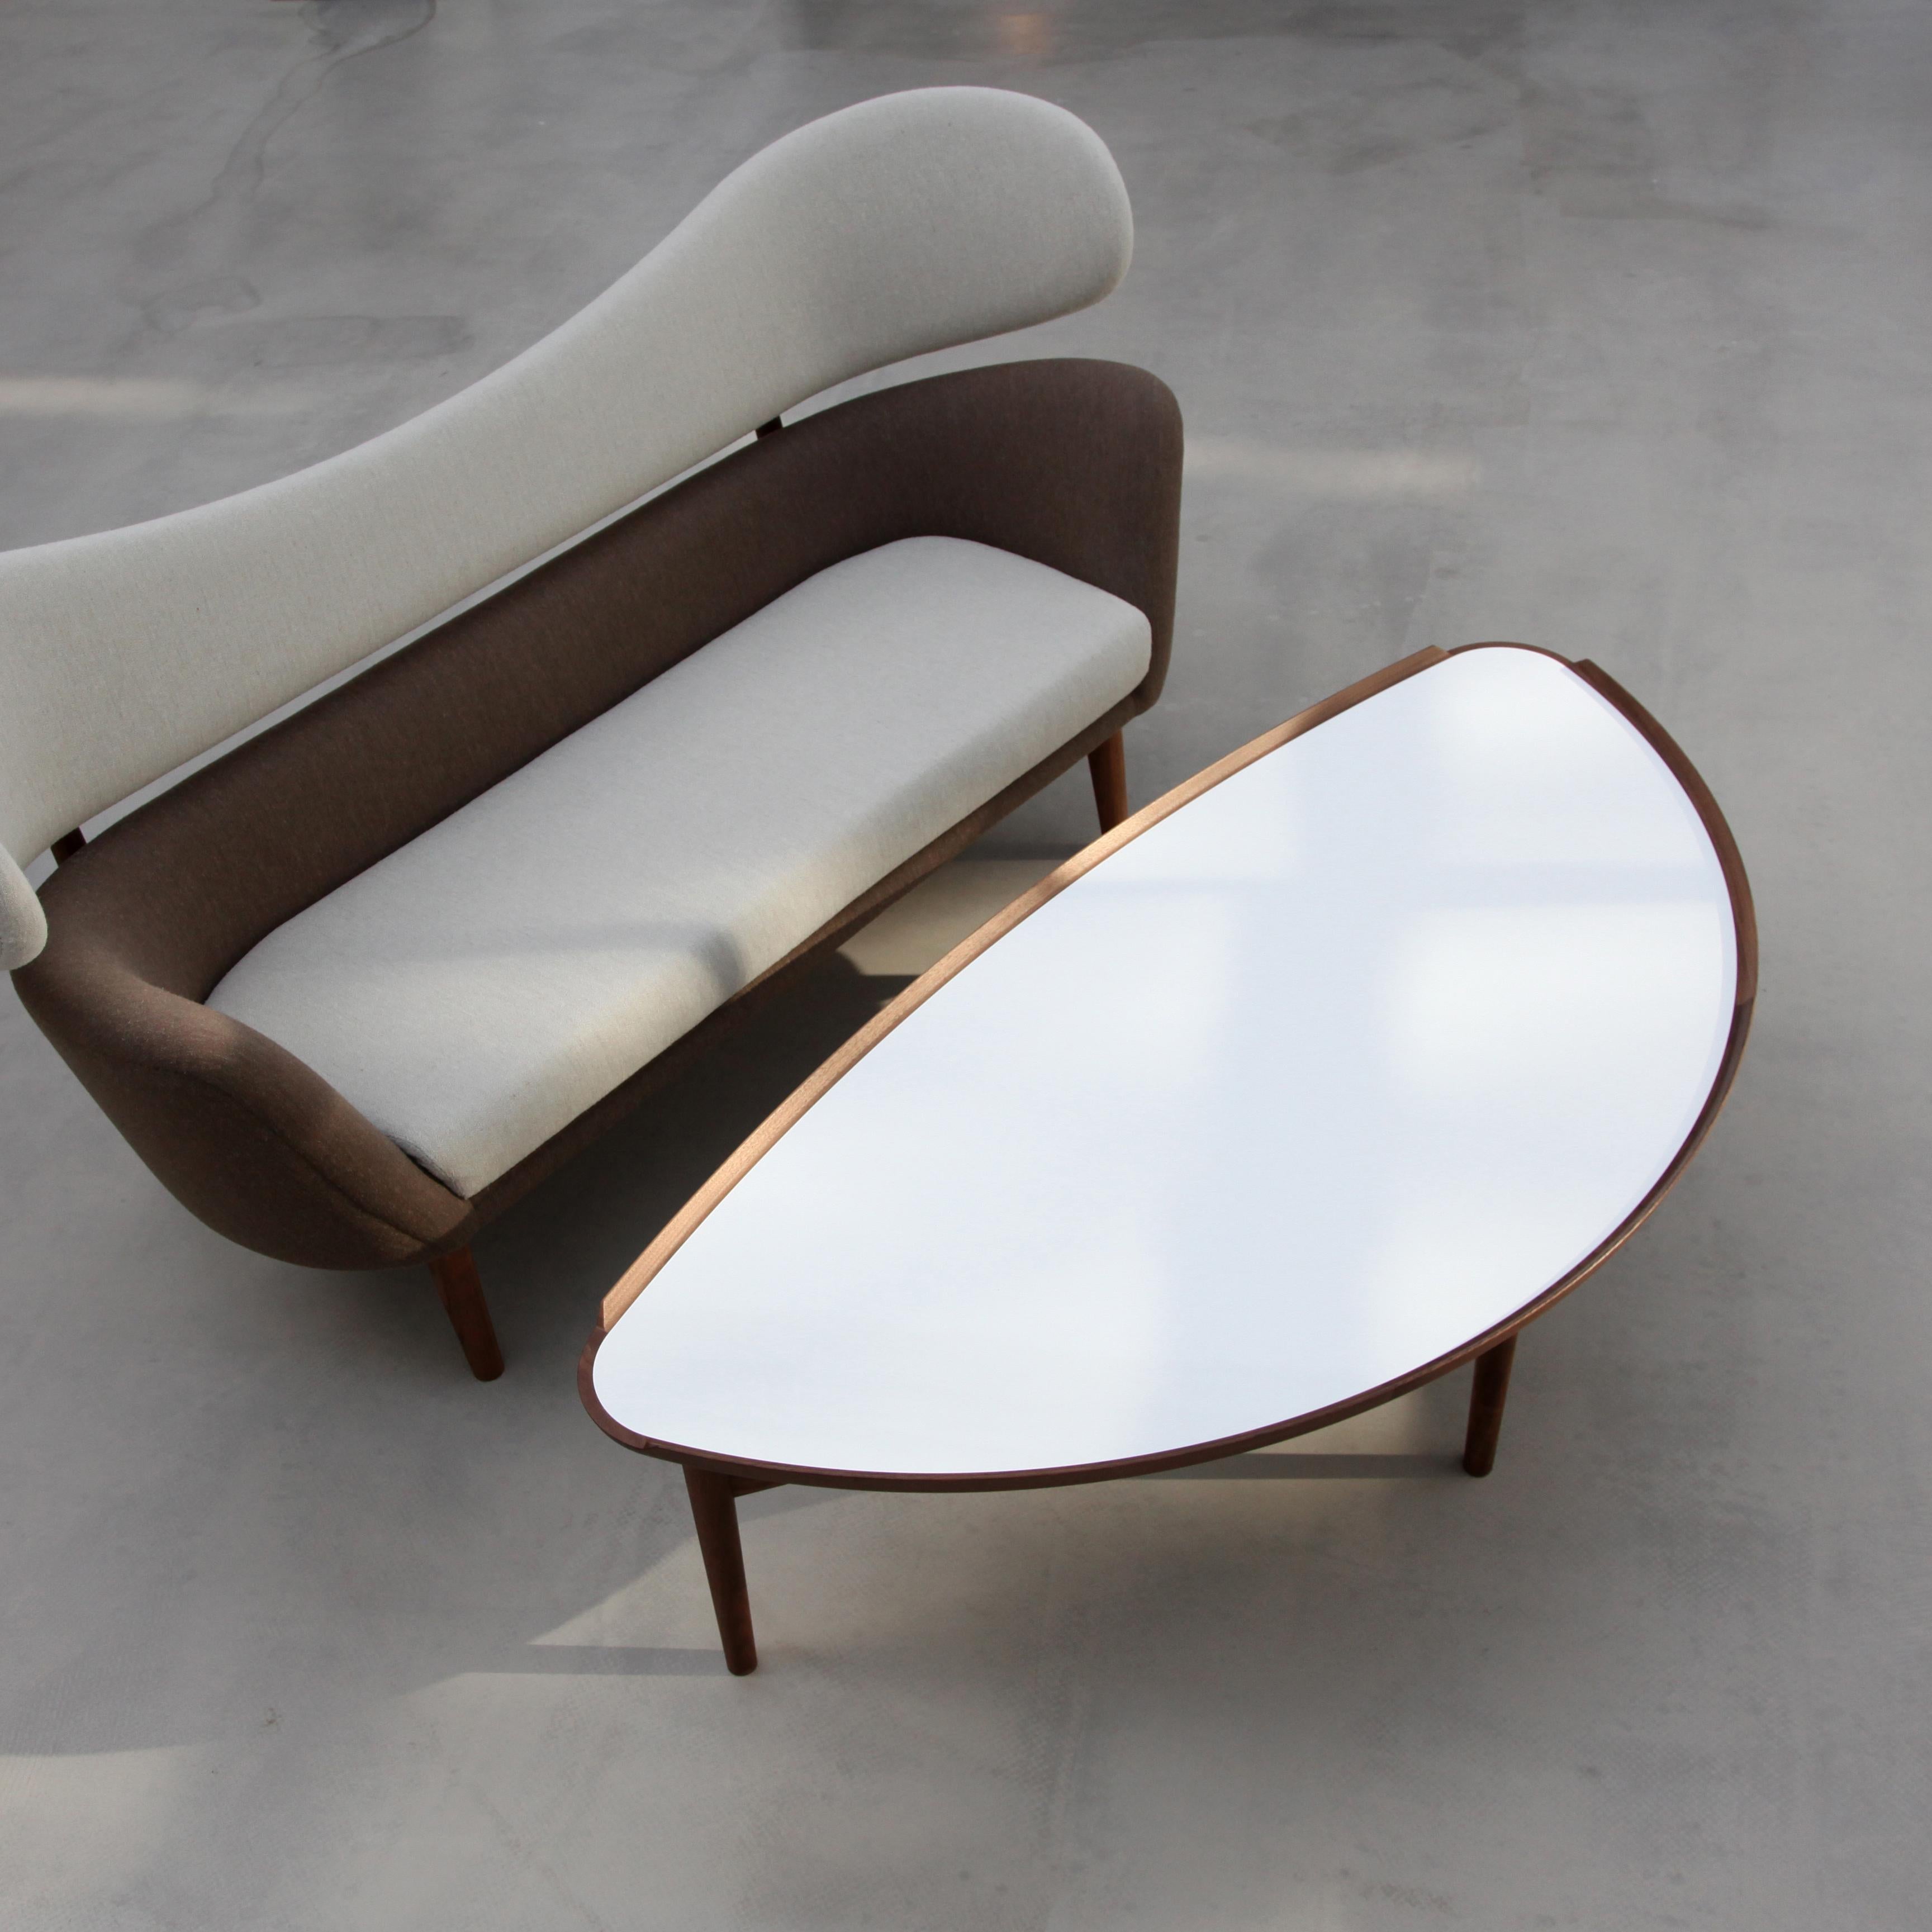 Table designed by Finn Juhl in 1951, relaunched in 2009.
Manufactured by House of Finn Juhl in Denmark.

Finn Juhl’s cocktail table was designed for Baker Furniture in the United States to match the sculptural Baker Sofa.

The economy was